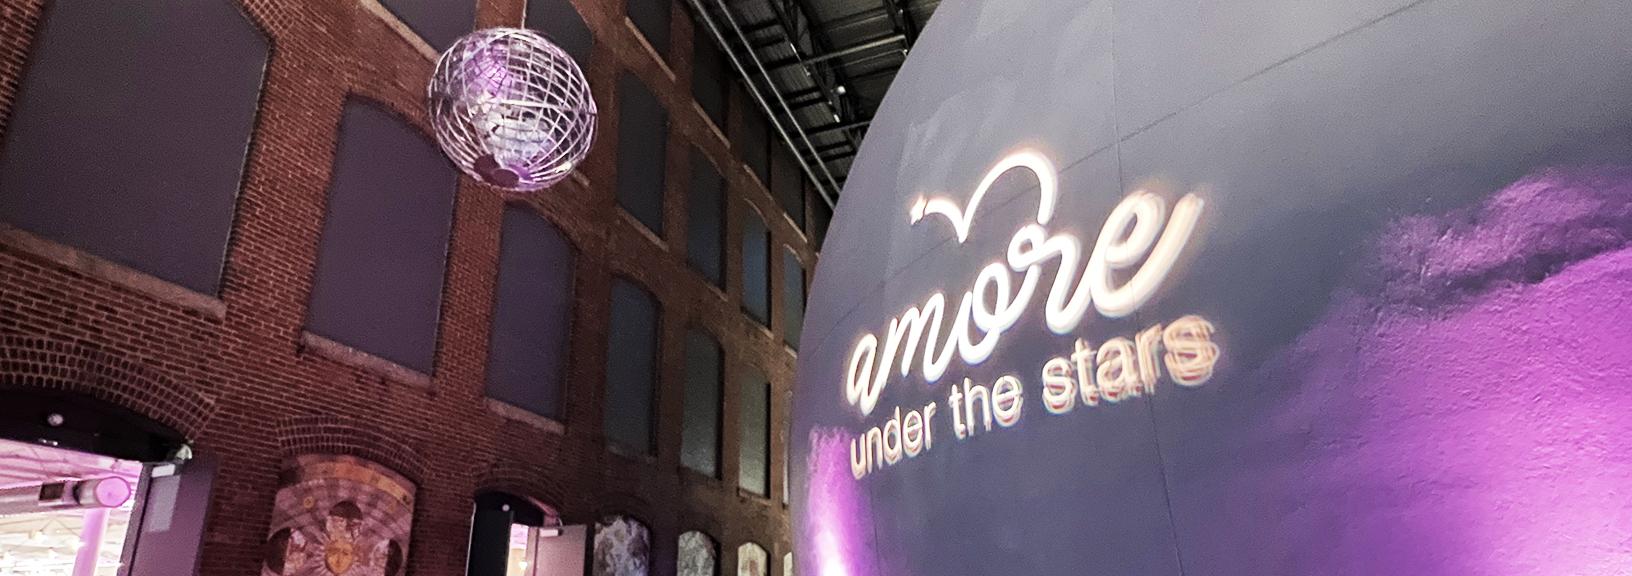 Exterior of planetarium dome and lobby with the Amore Under the Stars event logo projected in white lights against the gray dome with pink up lights to either side of the logo